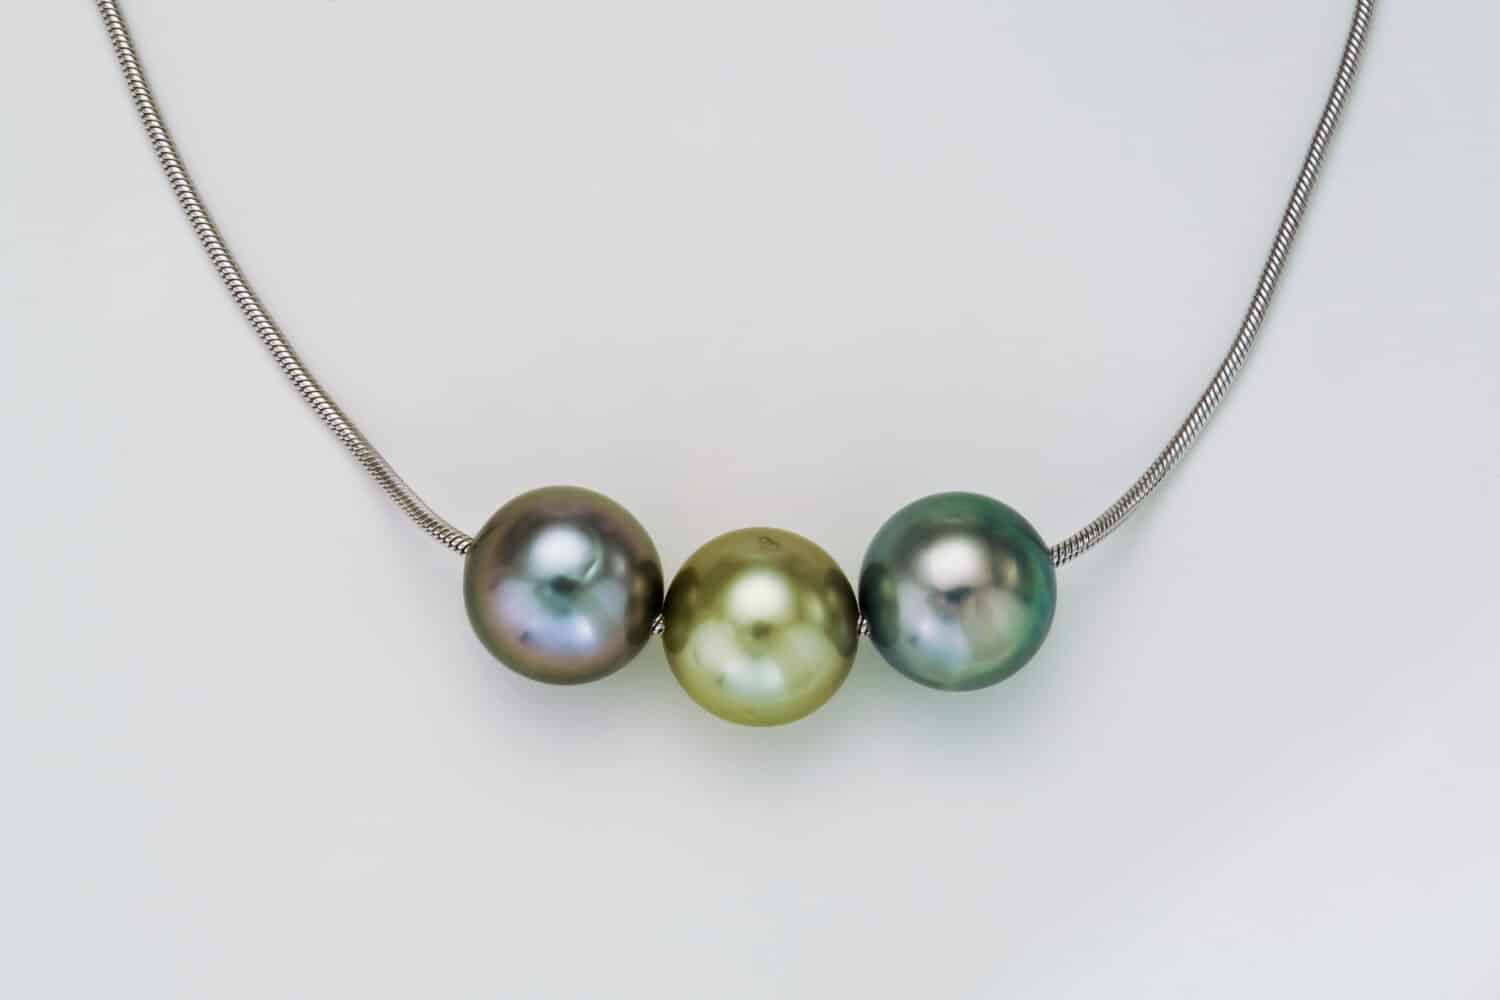 Three different light colored round Tahitian Pearls are shown on a white gold round neck chain. Shown on a white background.